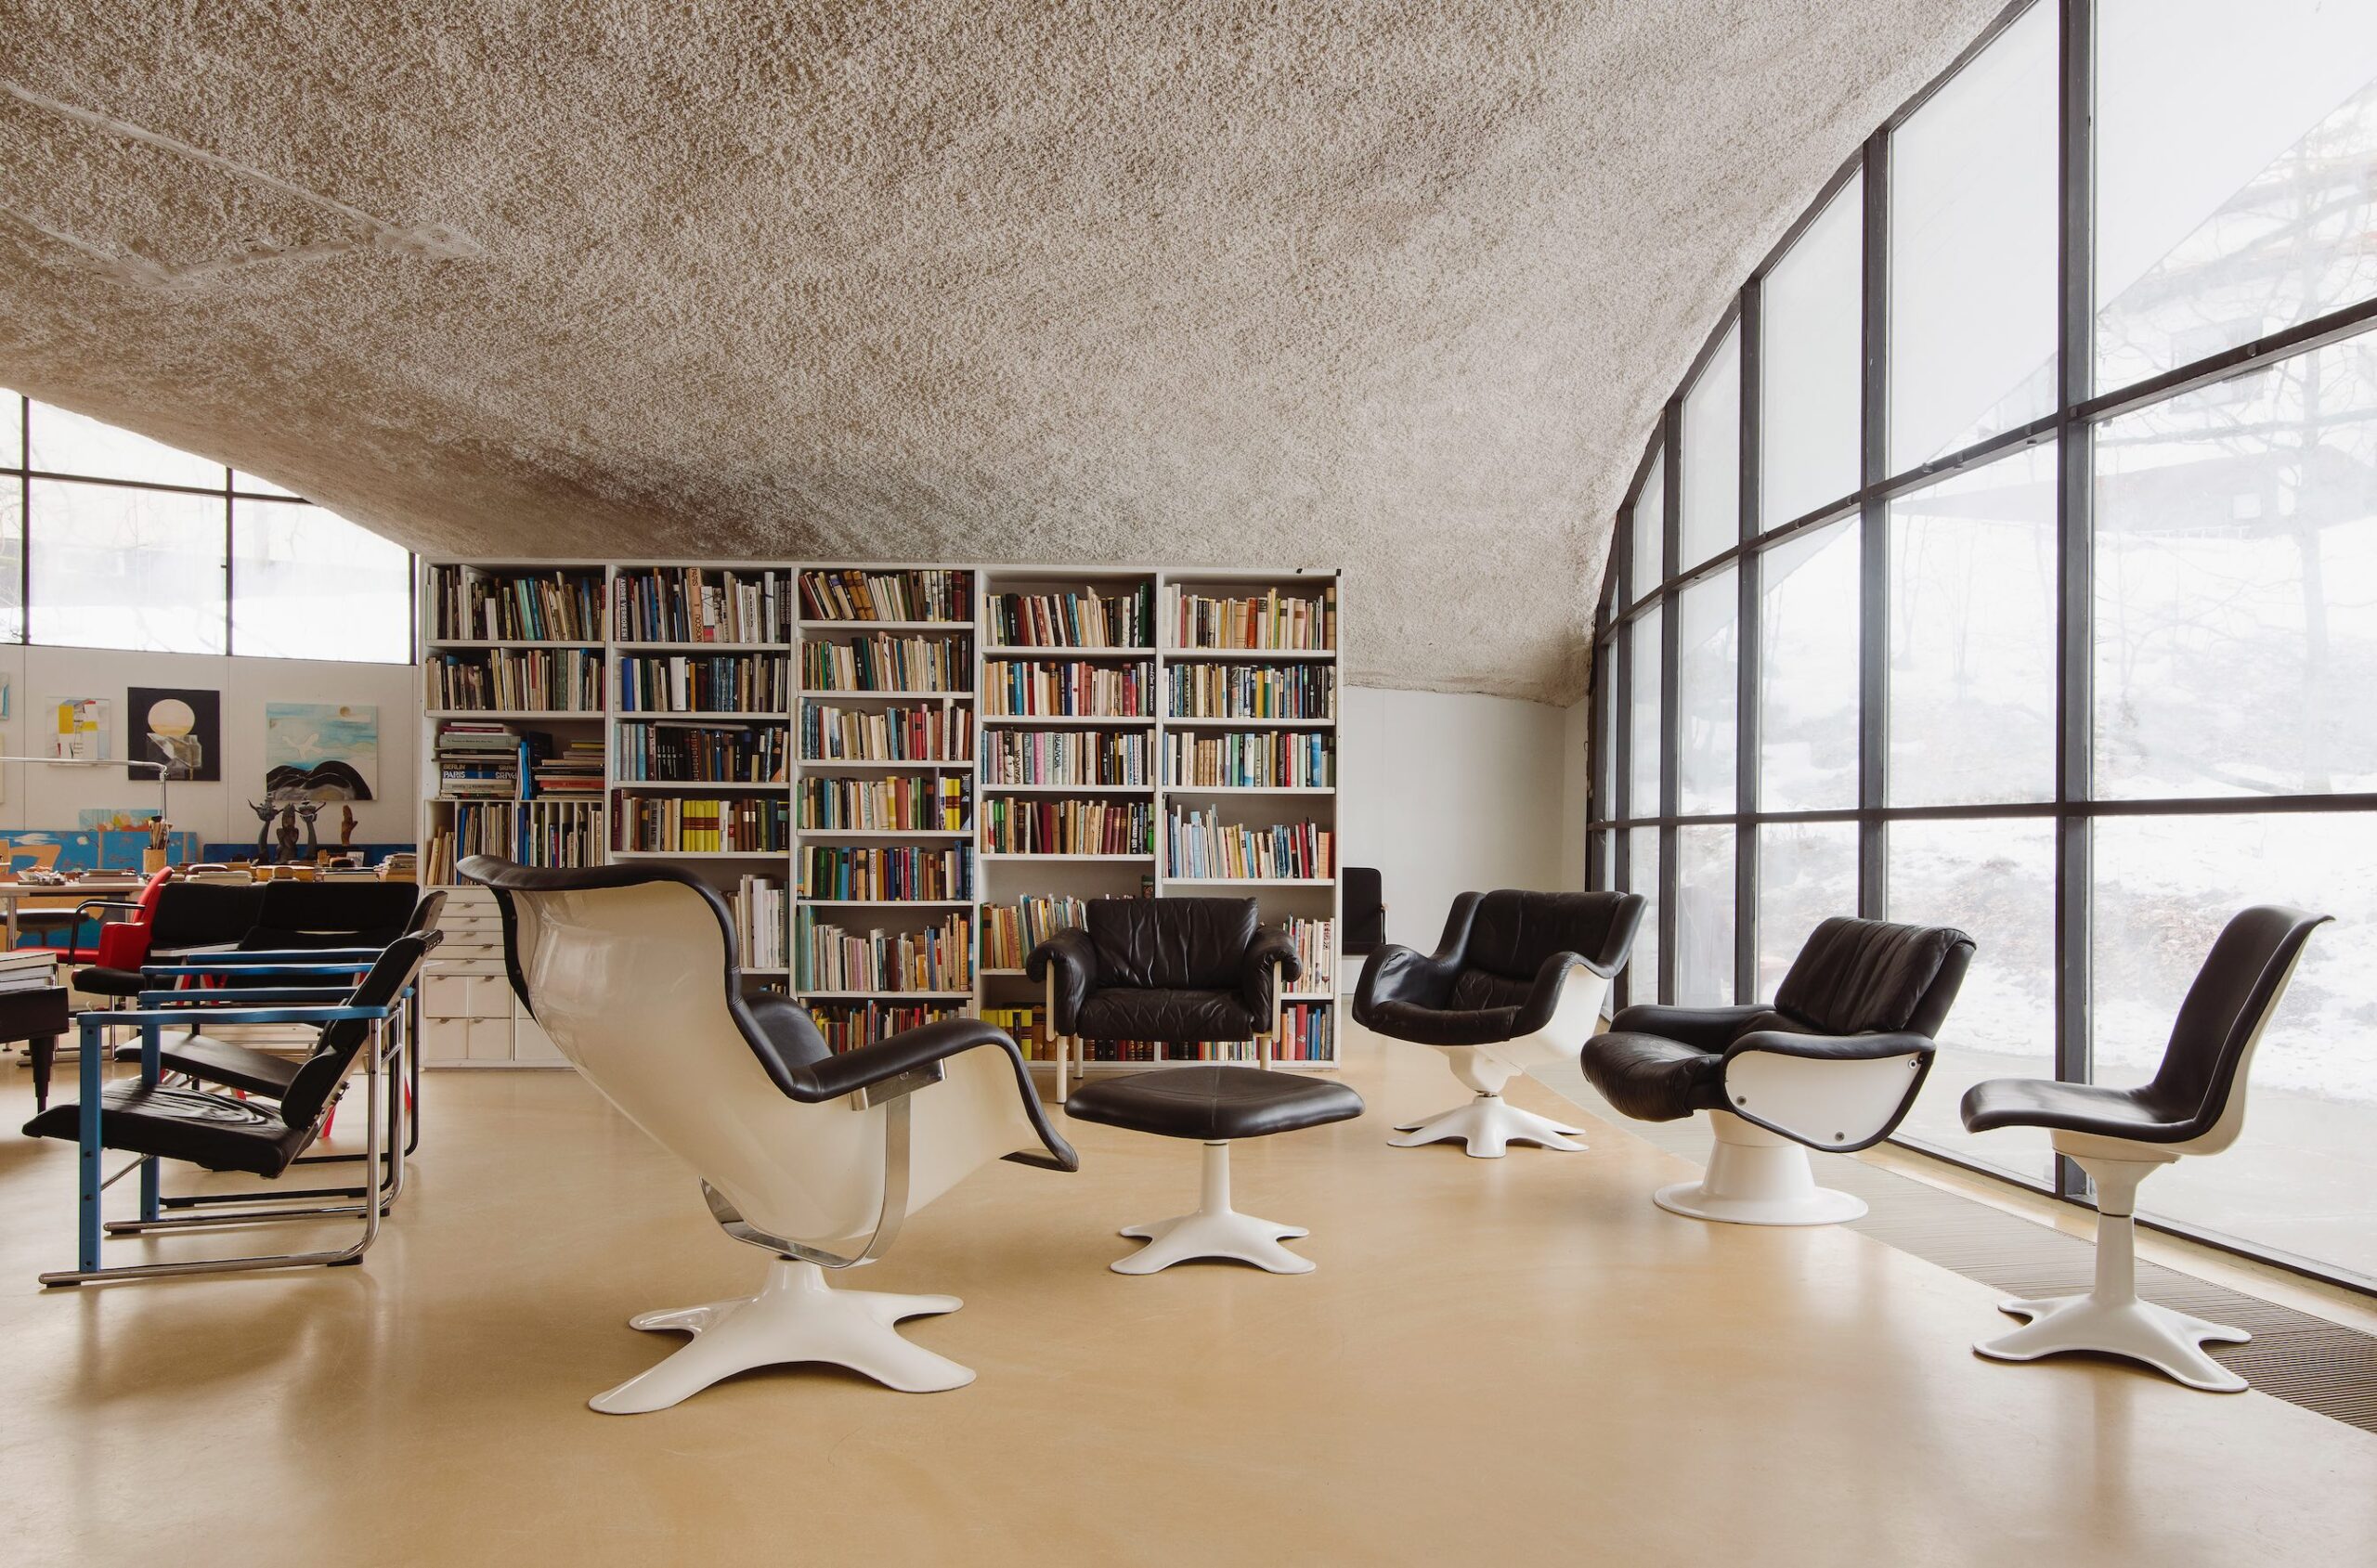 Kukkapuro House interior curved ceiling chairs